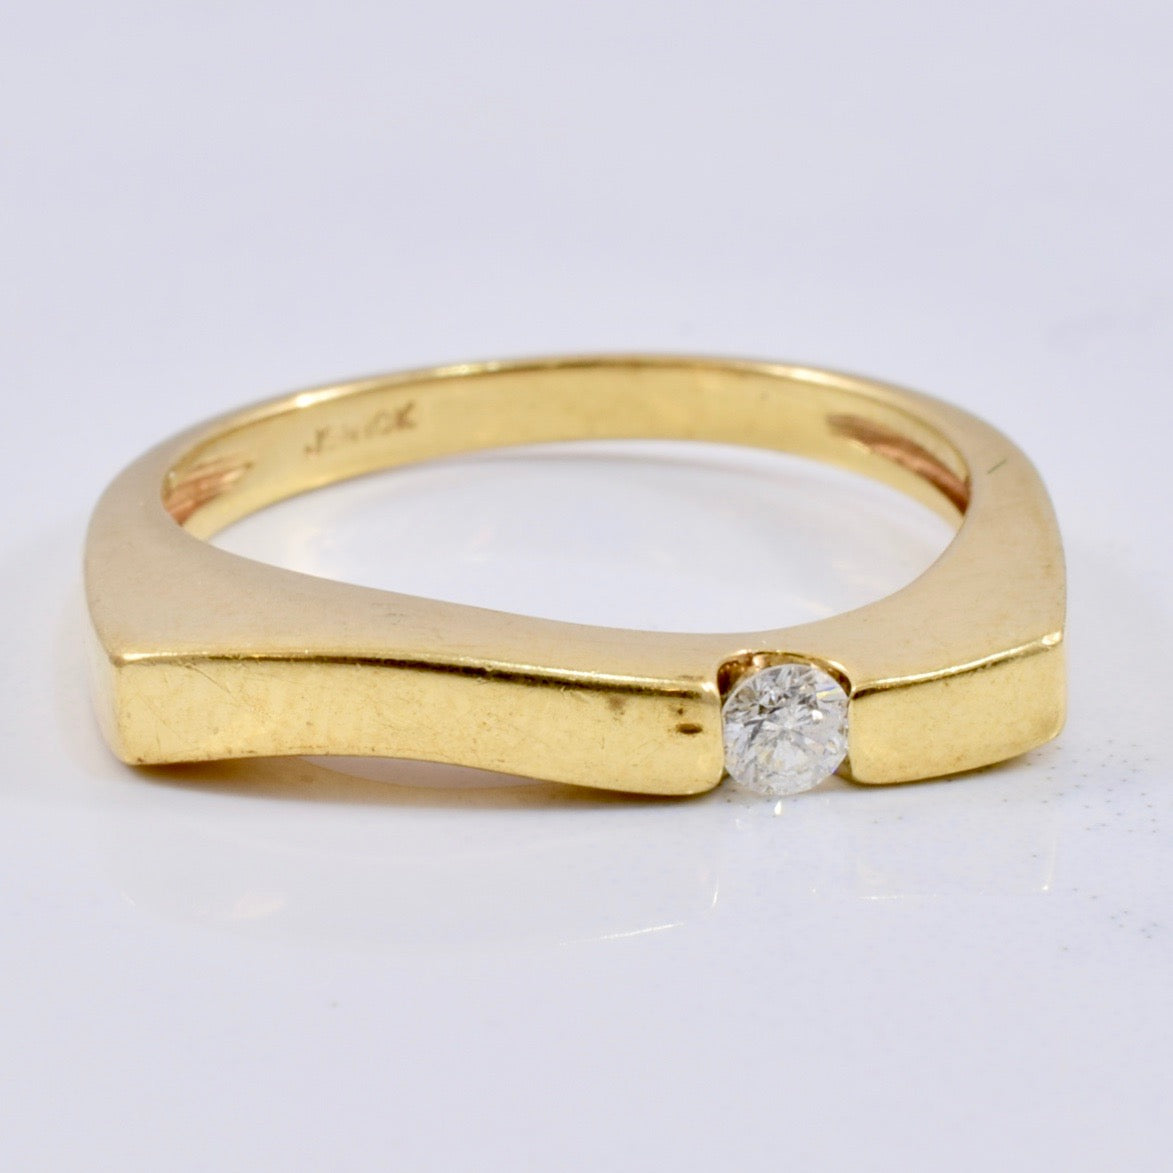 Square Gold Band with Single Diamond | 0.07 ct SZ 6.75 |